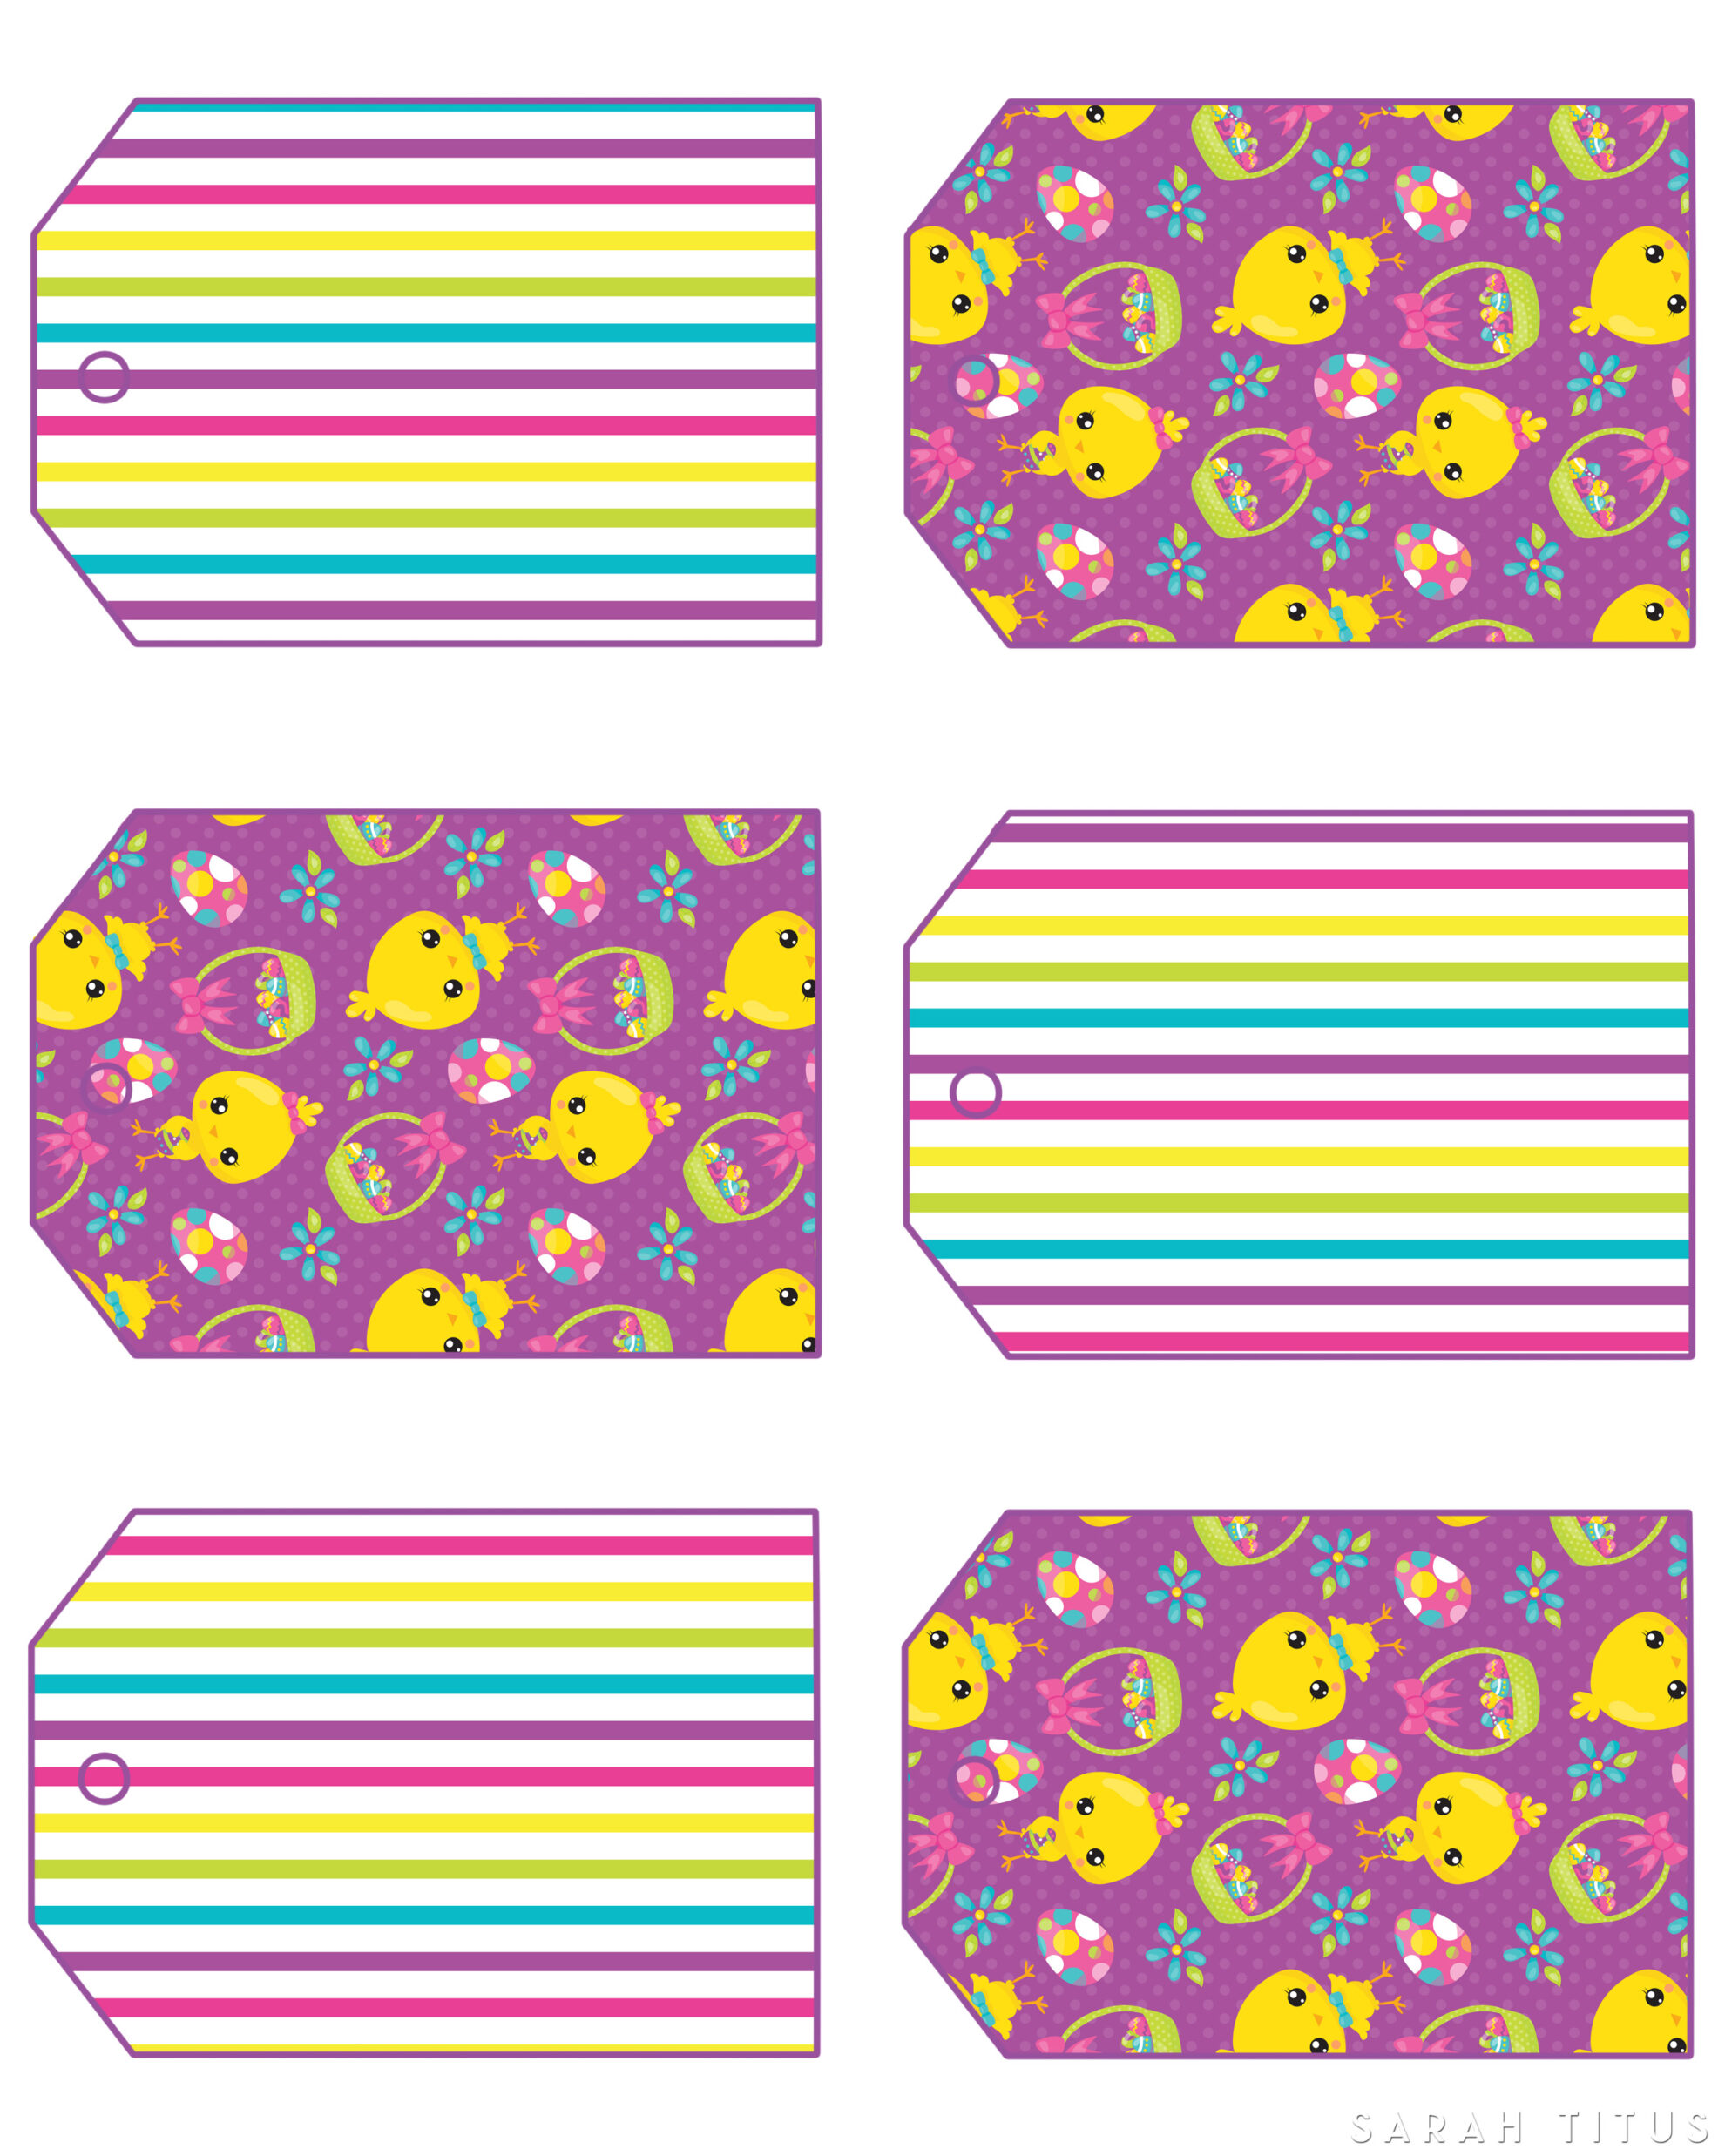 Use them for gifts, on your Easter baskets, as place cards, as bookmarks; these free printable Easter gift tags have dozens of unique uses! Click over to access and get your free 100+ page Easter binder while you're here!!!